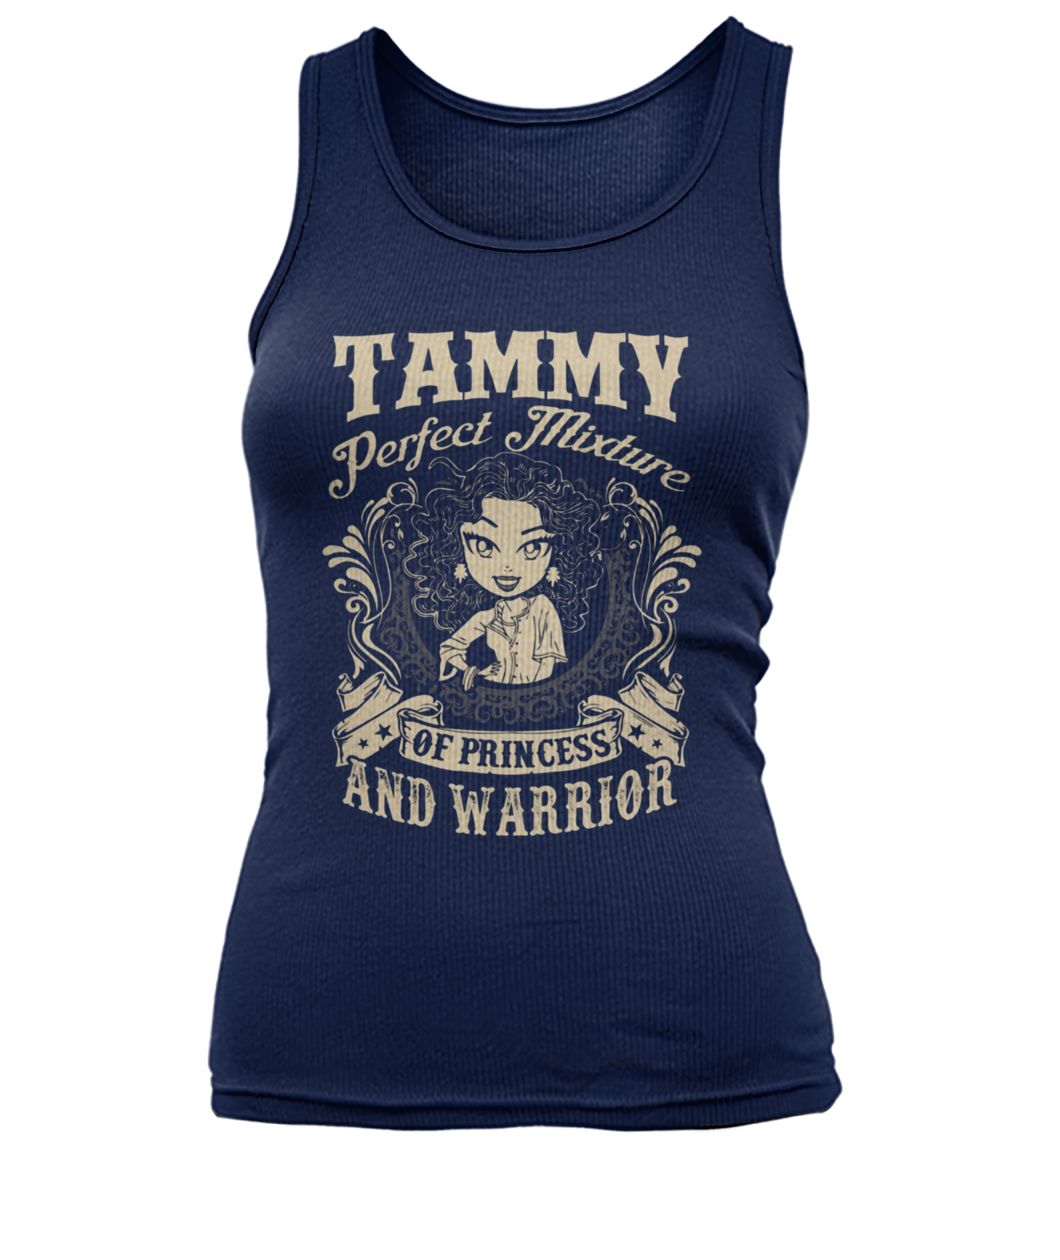 Tammy perfect combination of a princess and warrior women's tank top